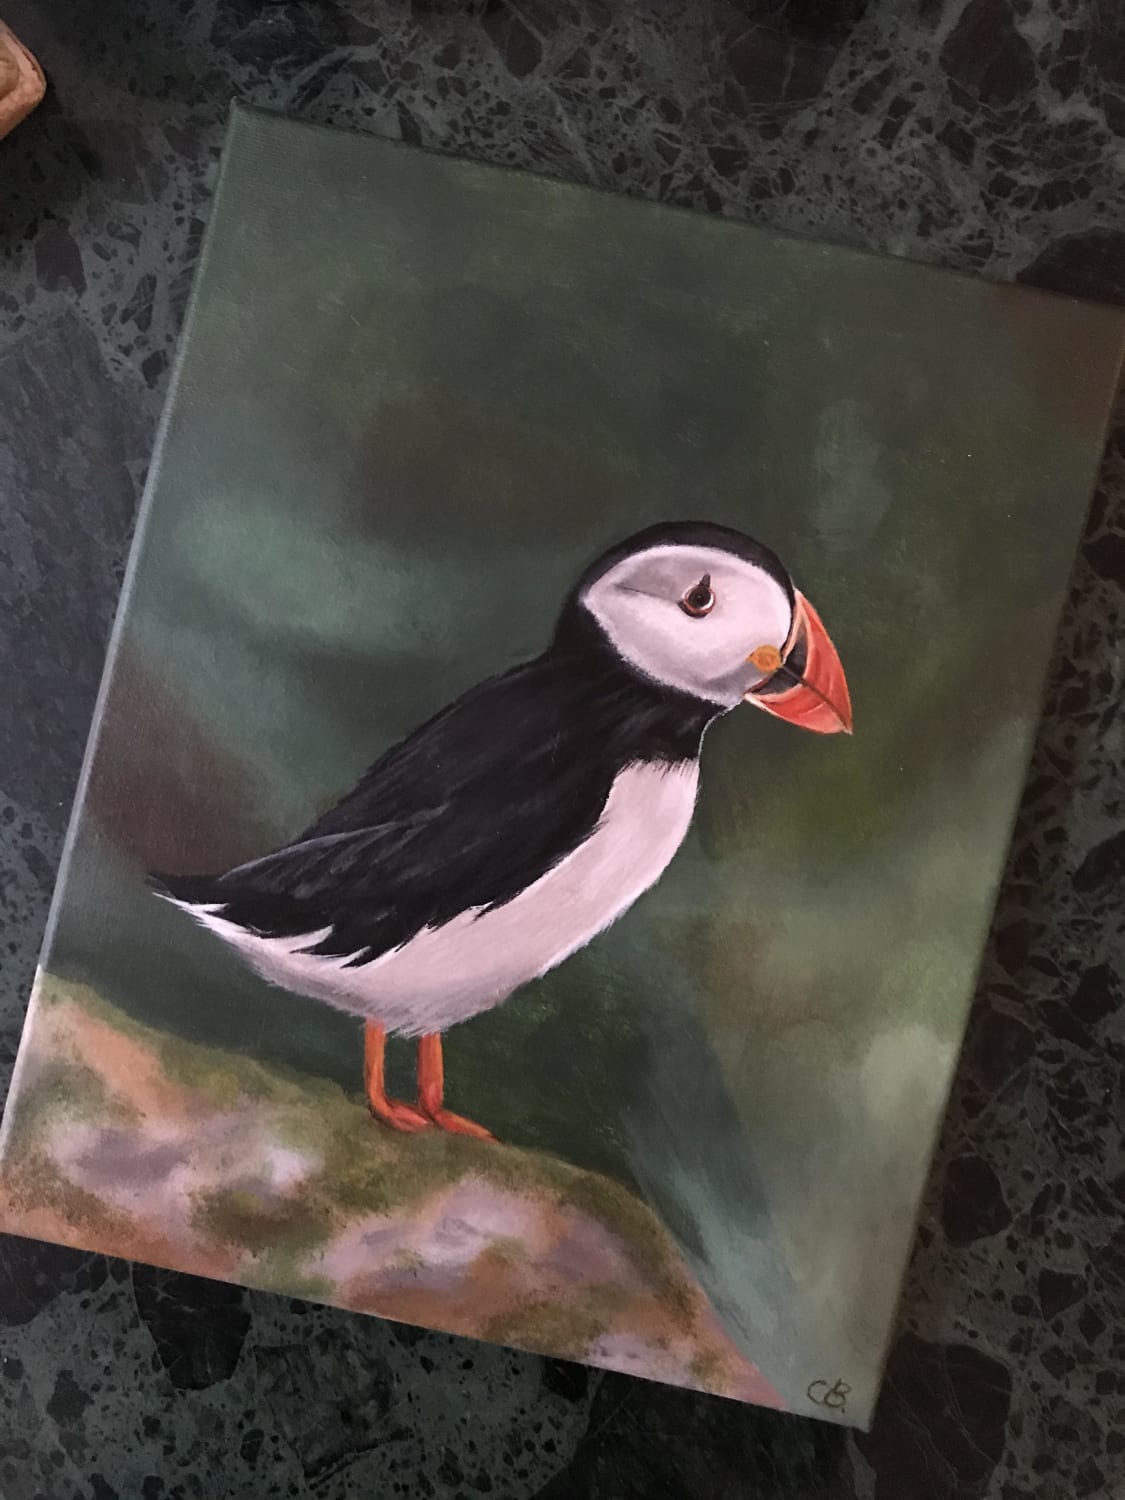 A puffin in acrylics for my boyfriend’s birthday. I’m still quite new to painting, but pretty happy with the result.